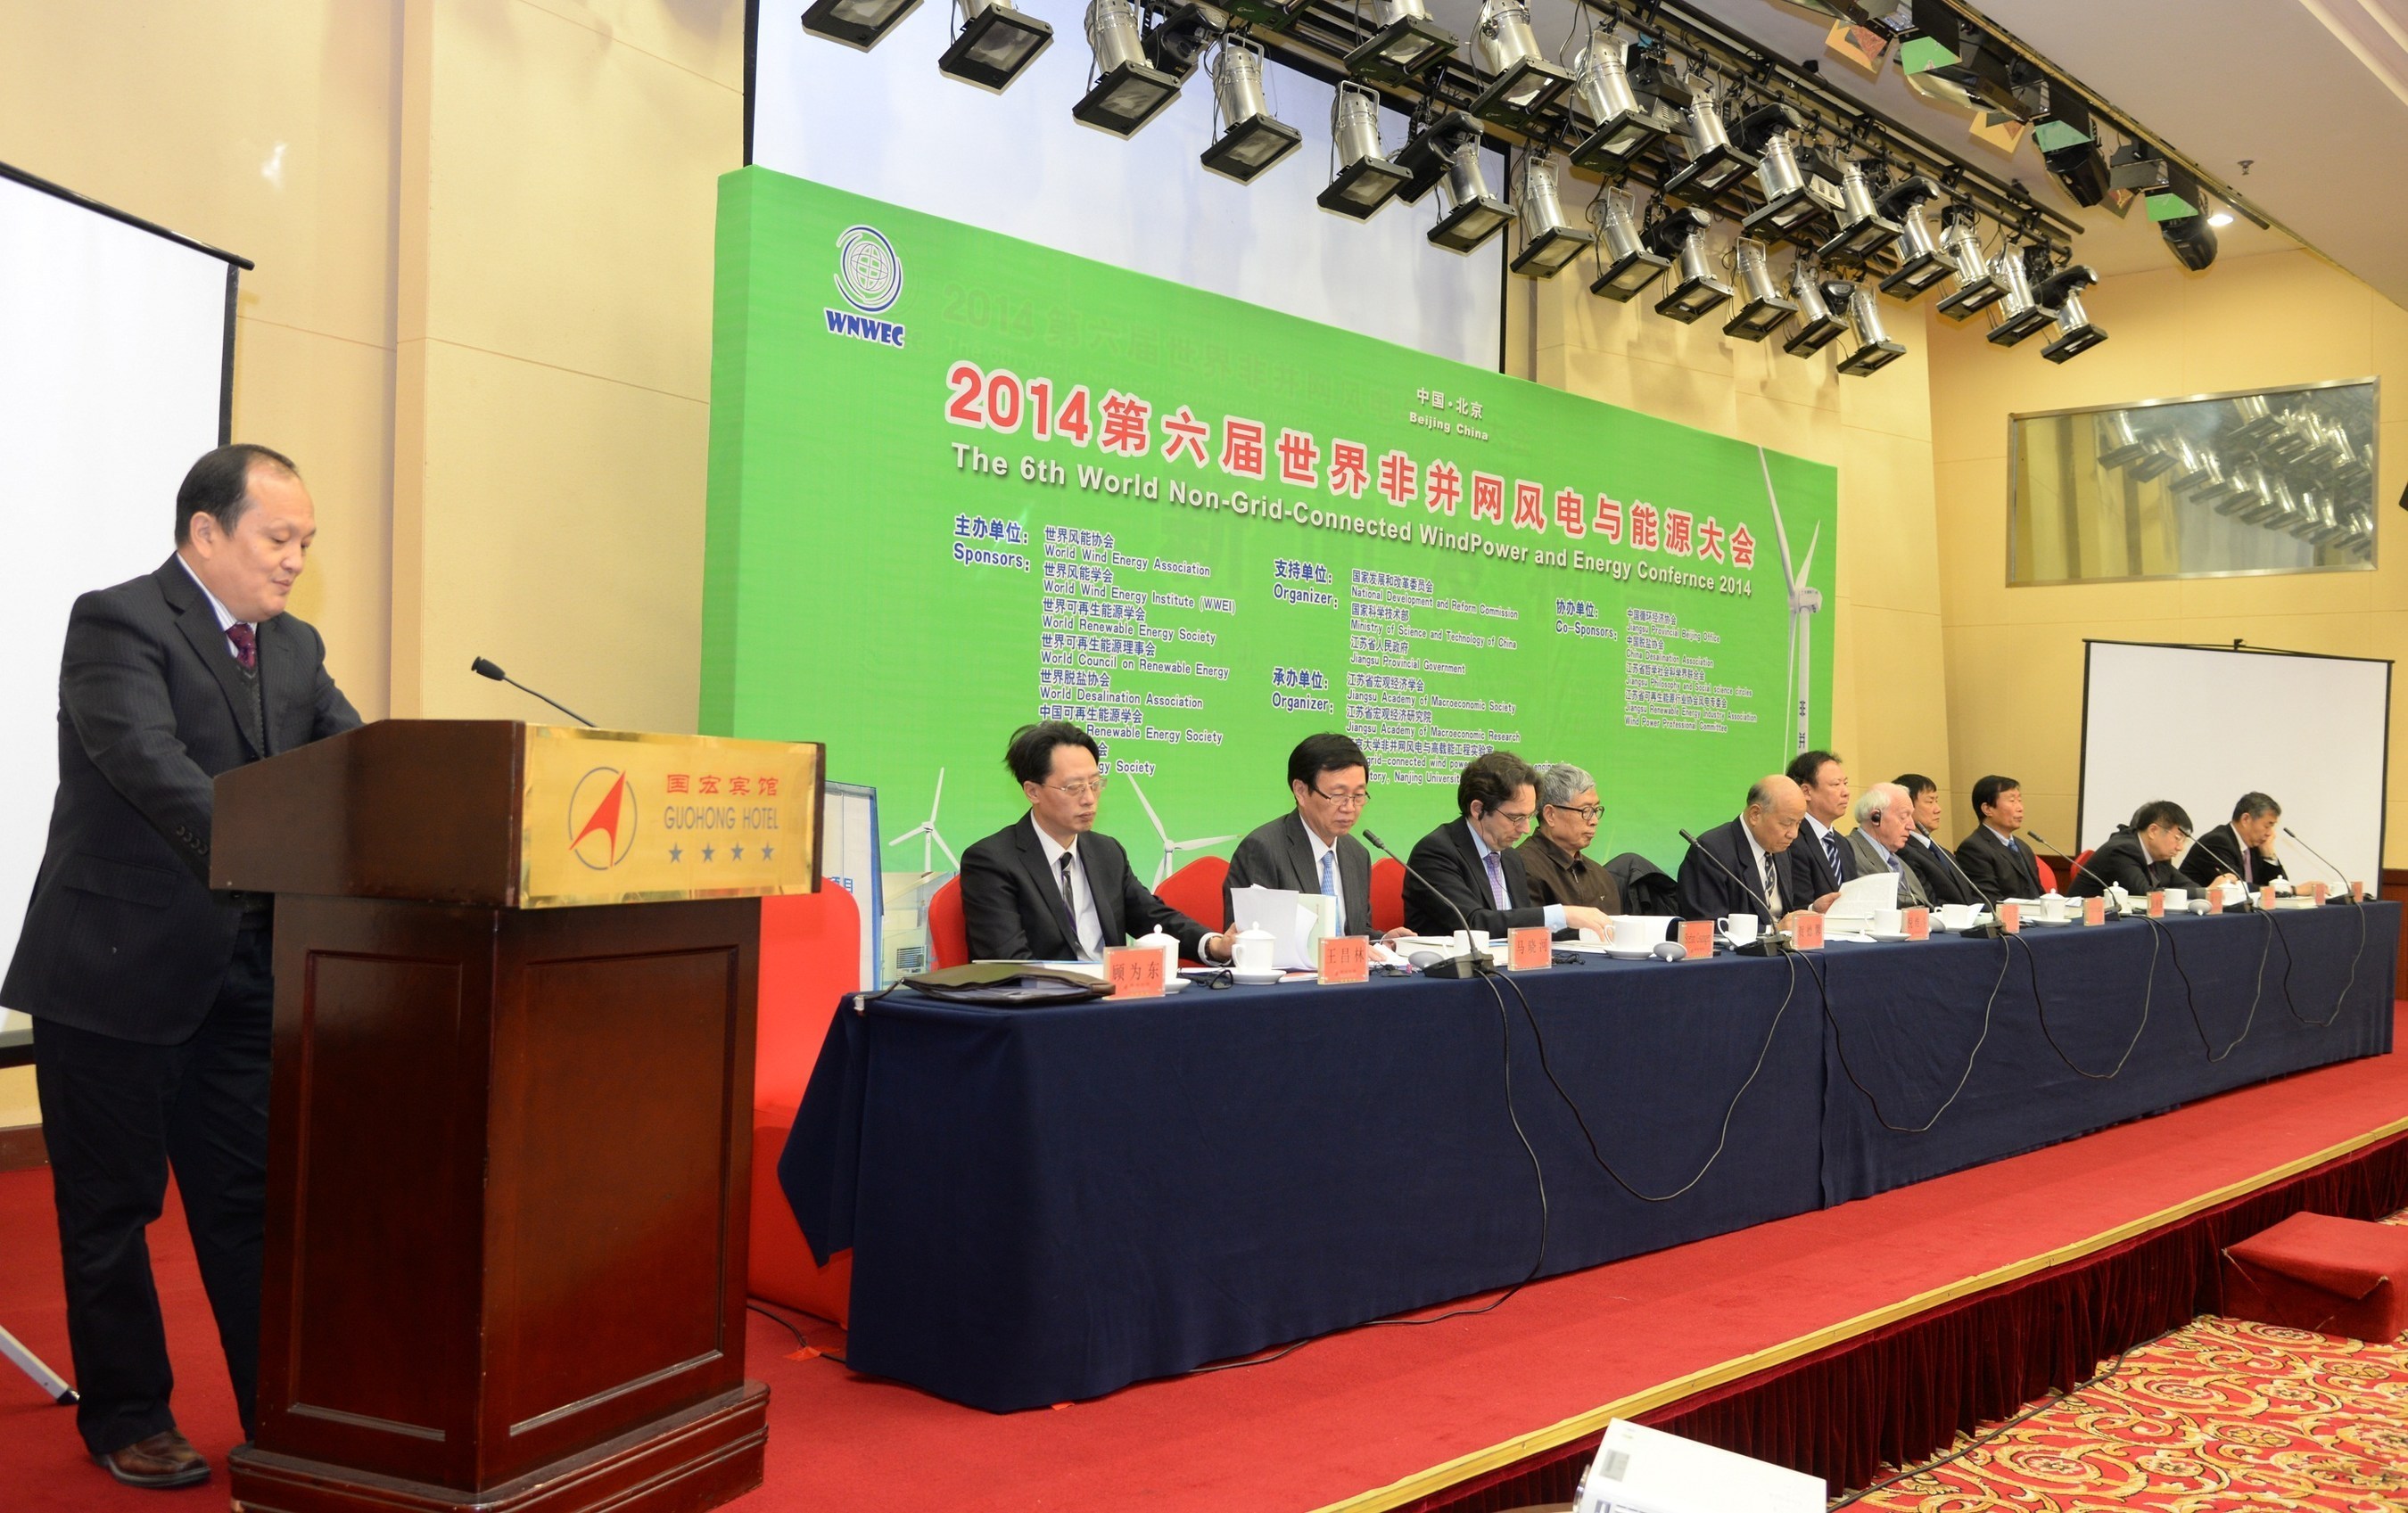 6th World Non-grid Wind Power and Energy Conference in Beijing